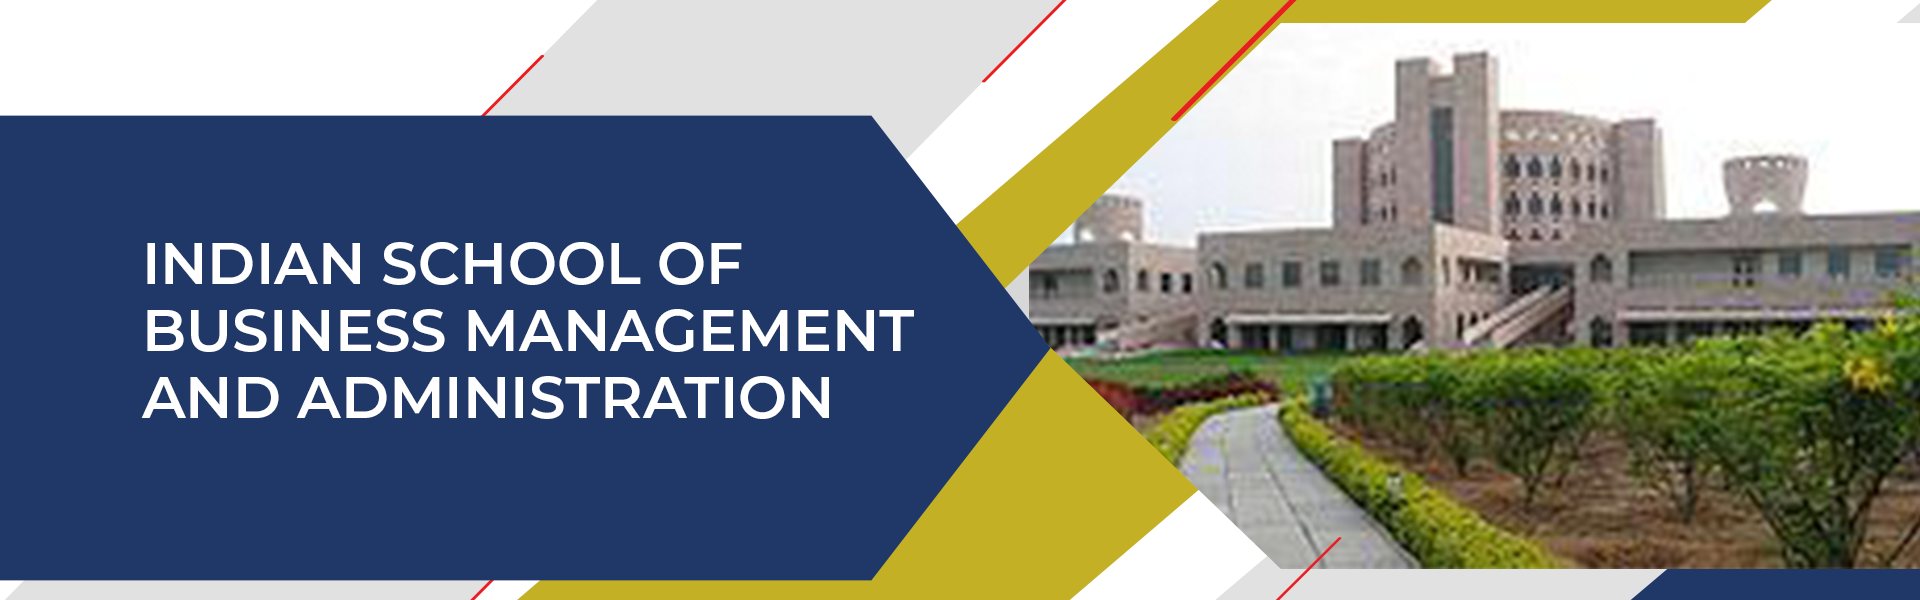 Indian School Of Business Management And Administration - [ISBM], New Delhi